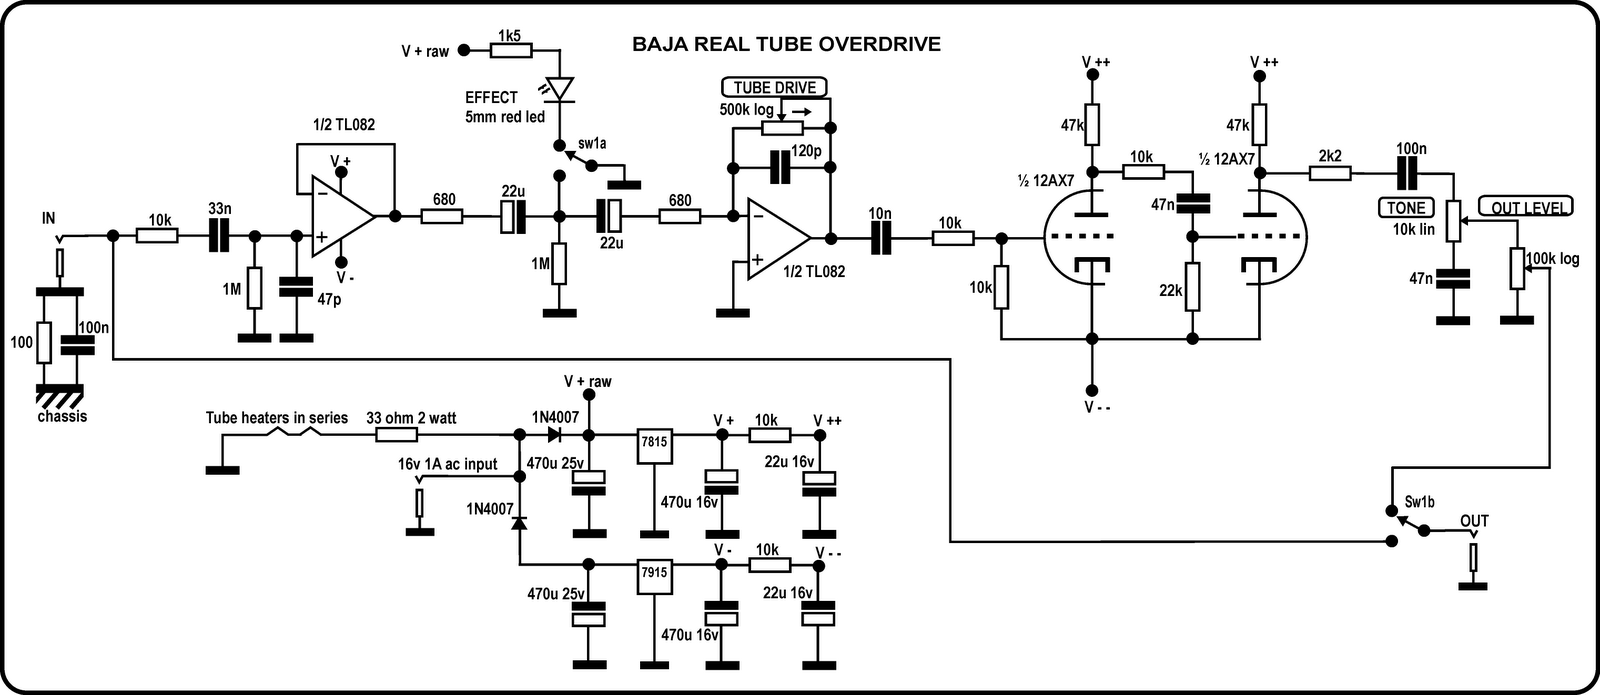 Baja+Real+Tube+Overdrive+Schematic.png